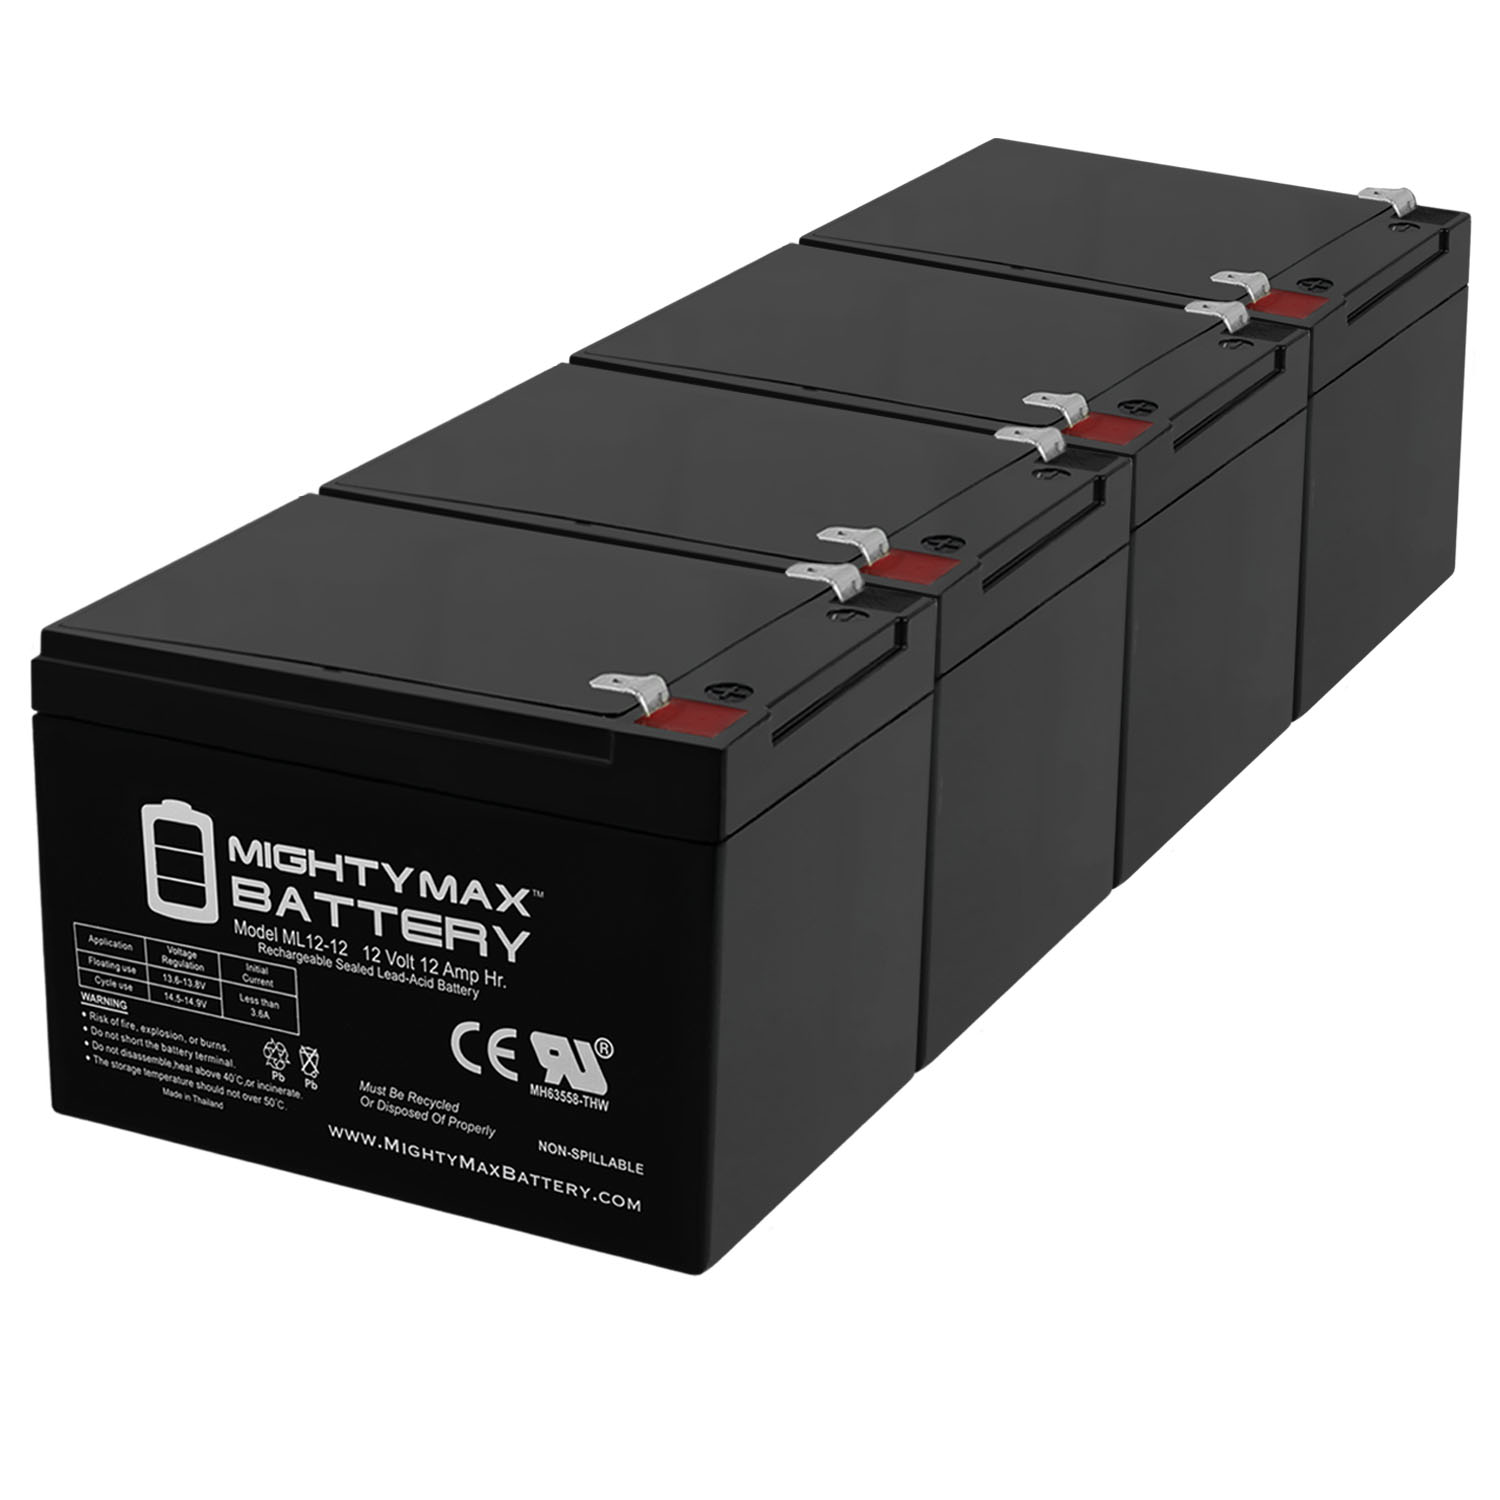 12V 12AH F2 Battery for GoPet Pet Pro Q Electric Scooter - 4 Pack